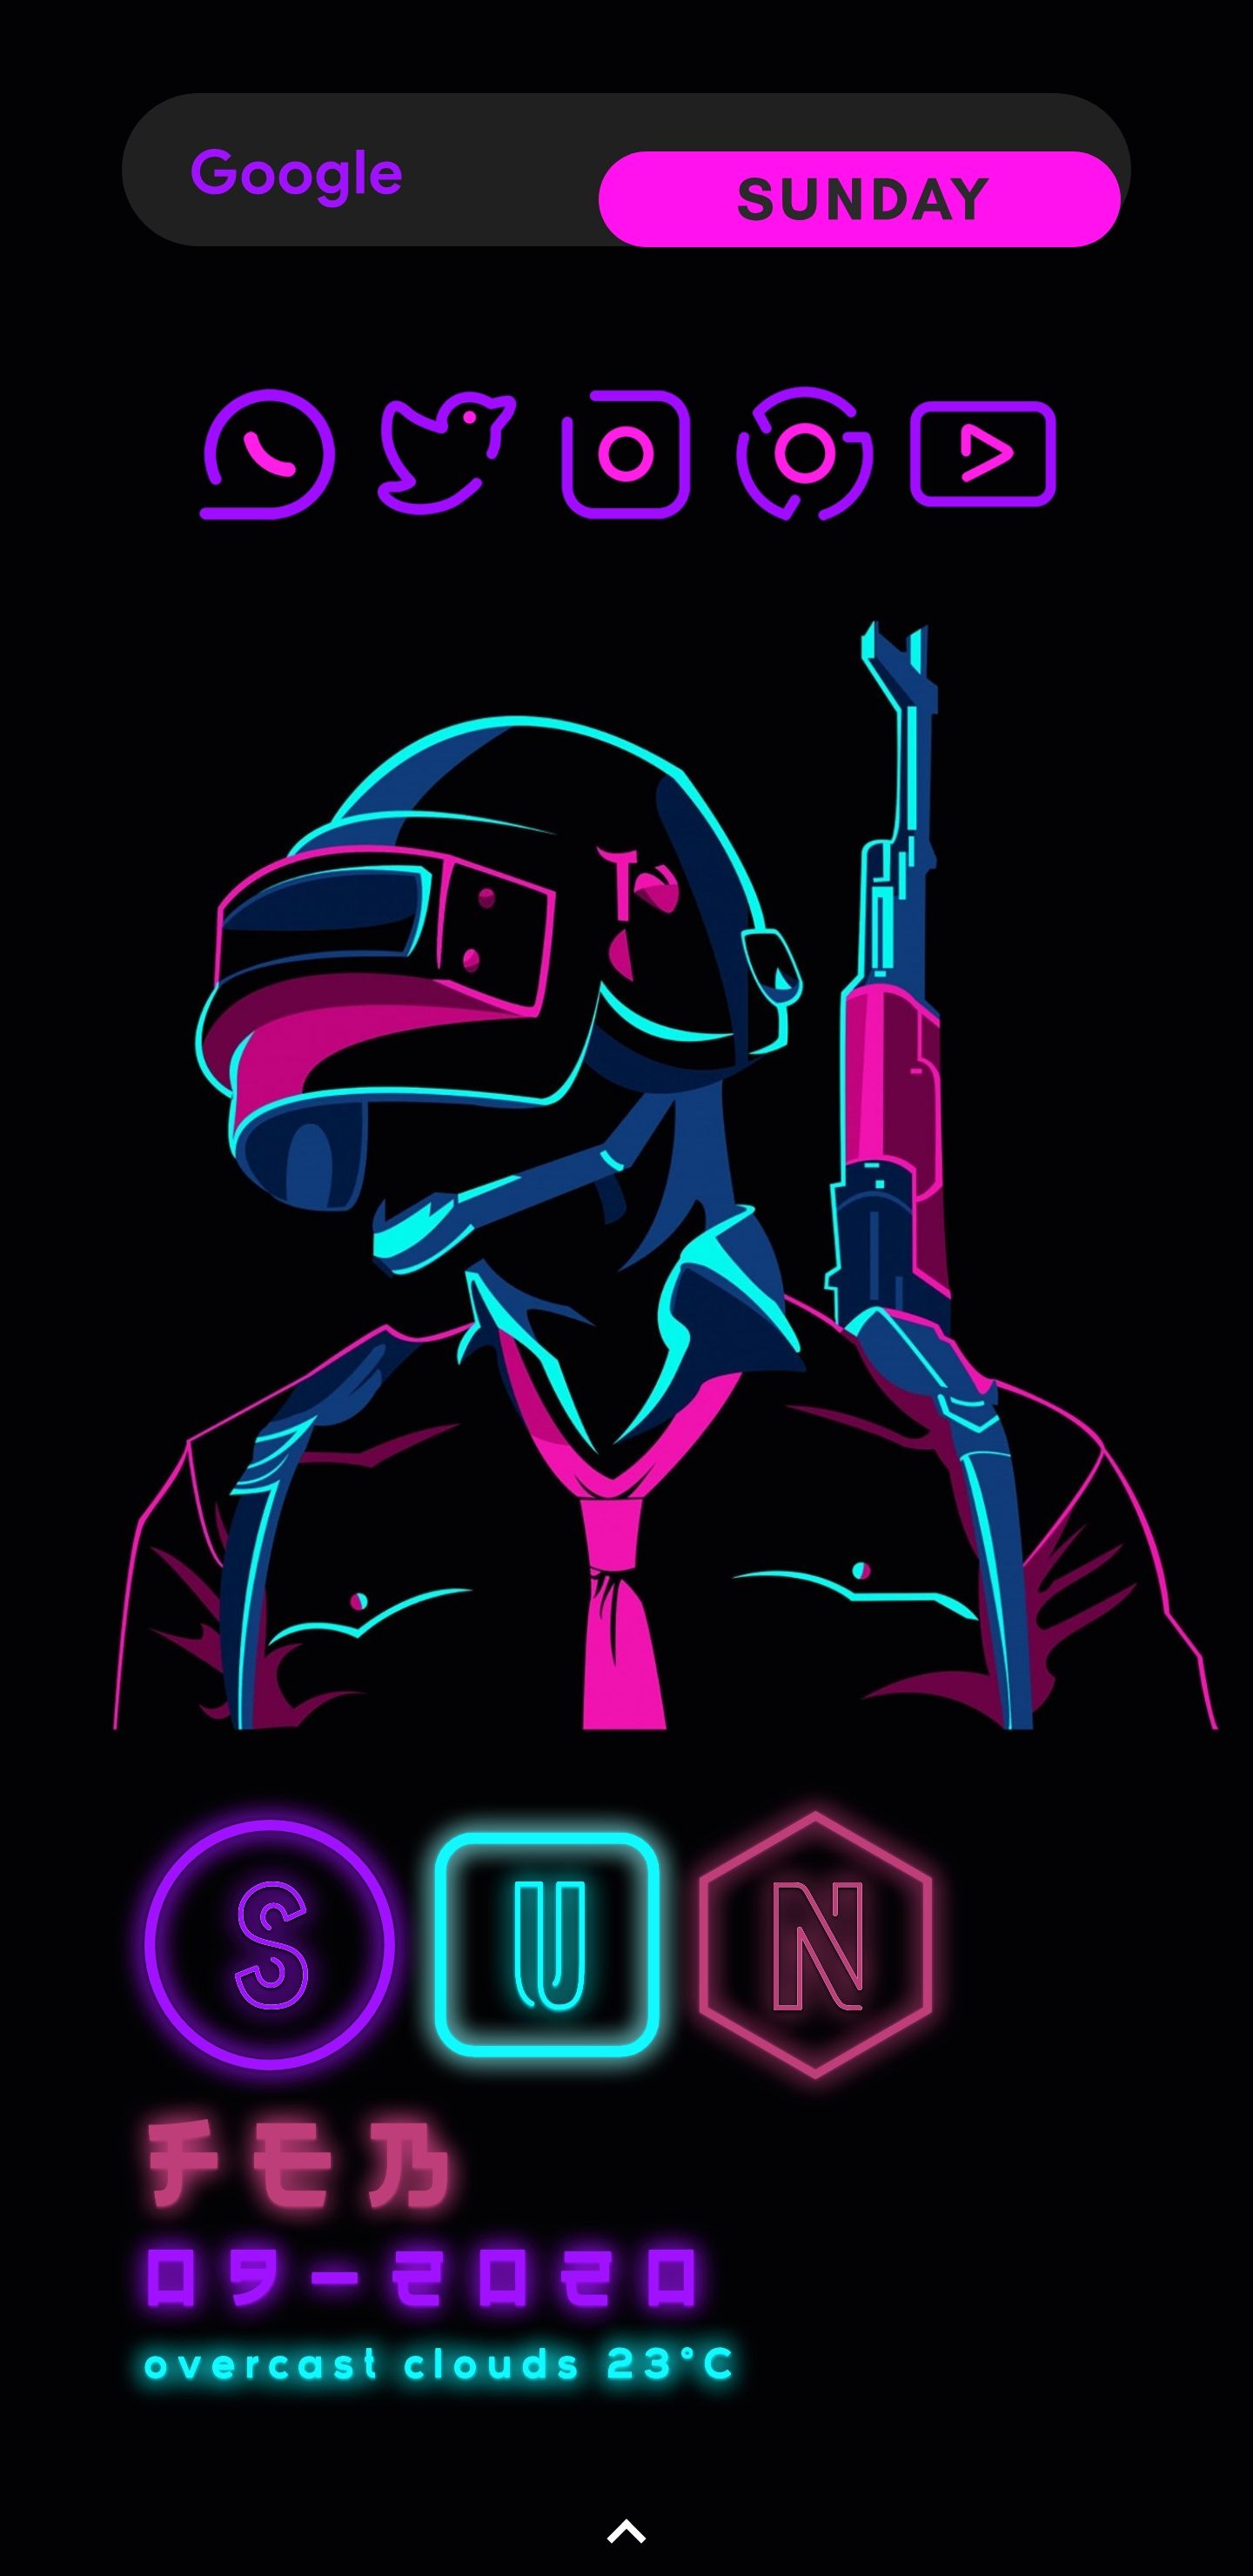 Pubg android android wallpaper neon wallpaper gaming wallpapers hd